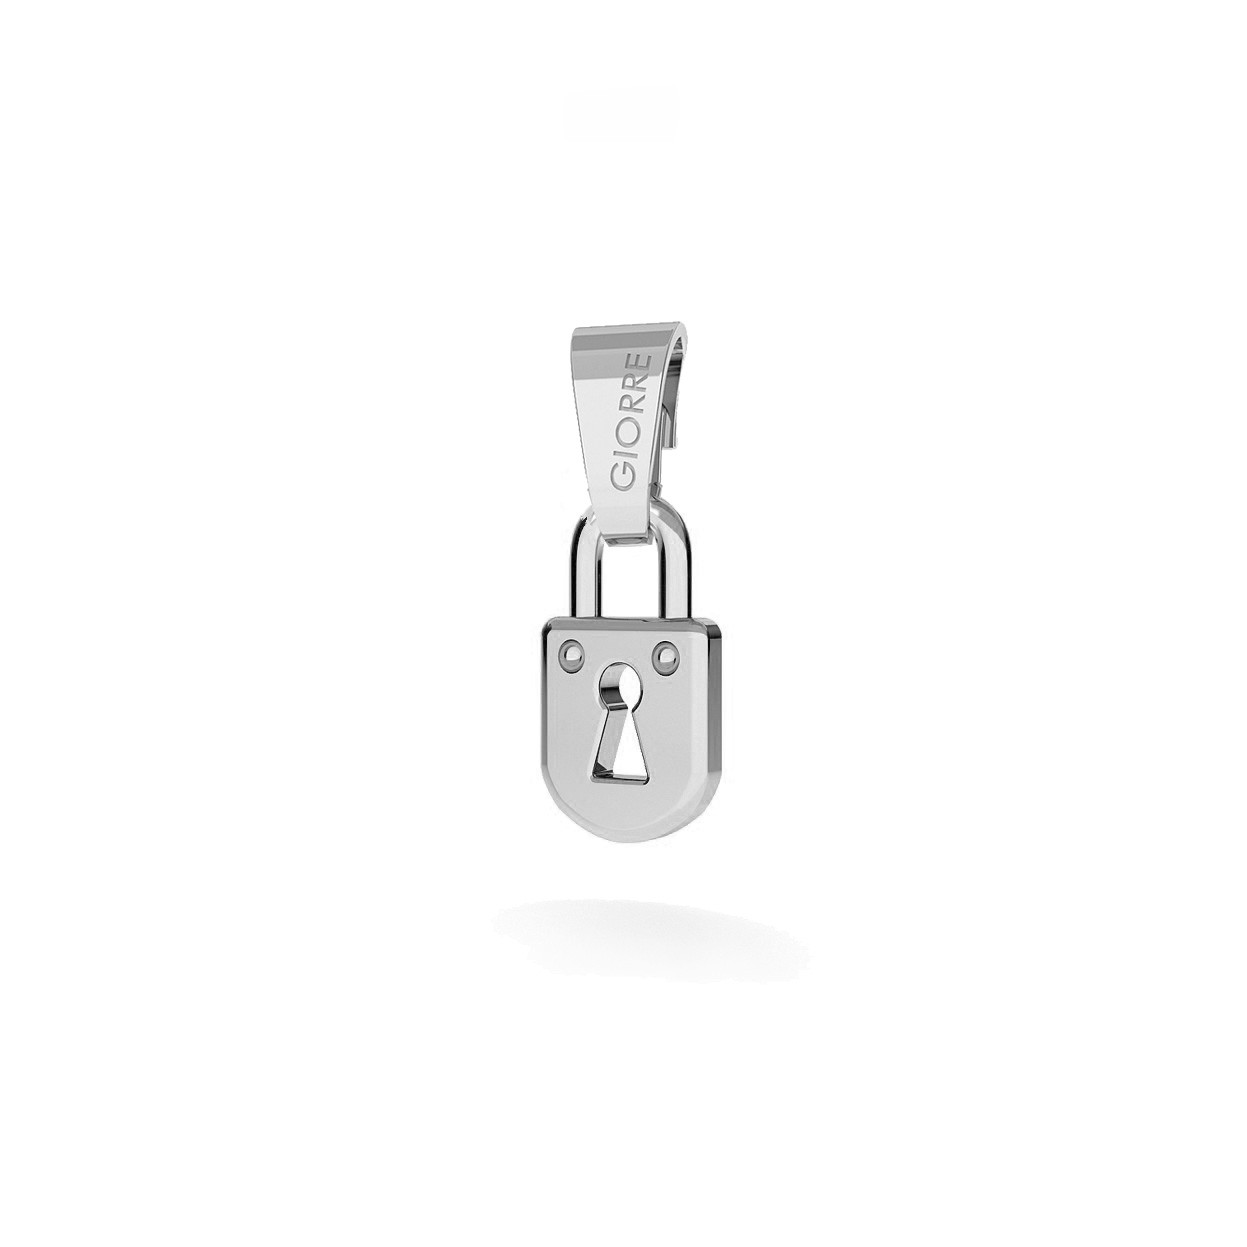 CHARM 89, PADLOCK, SILVER 925, RHODIUM OR GOLD PLATED